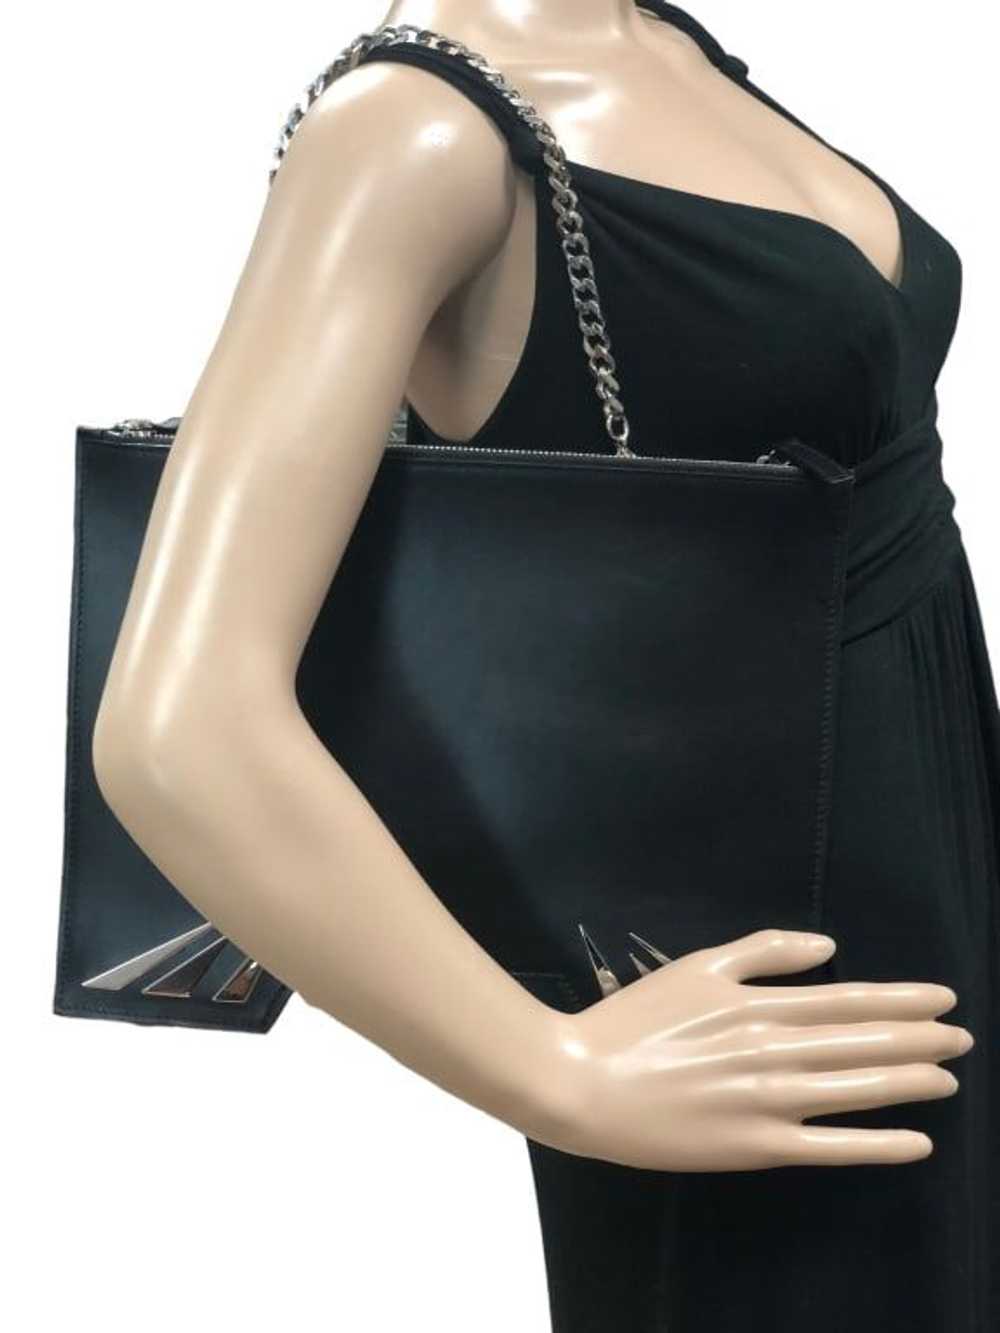 NWT GEORGE ANGELOPOULOS LARGE BLACK CLUTCH $995 - image 1